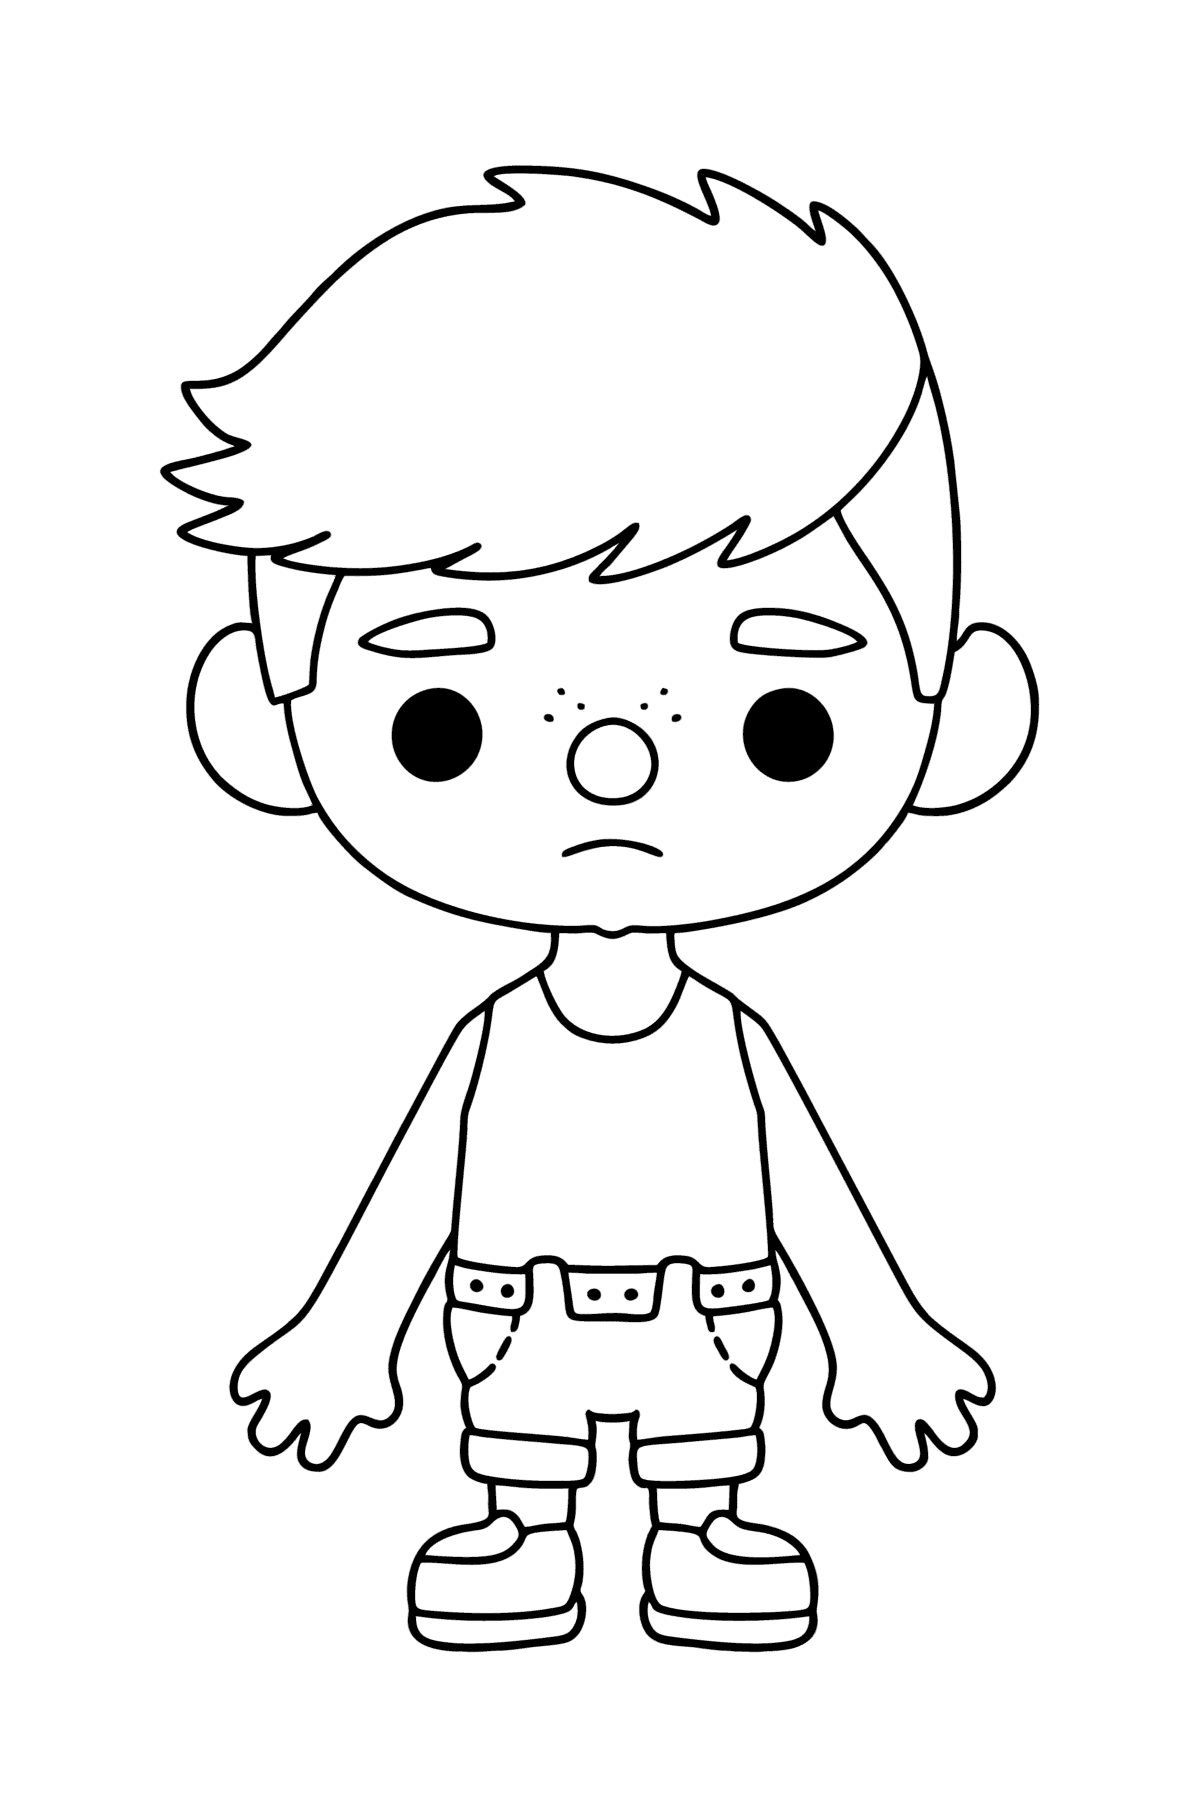 Coloring page Boy tocaboca 02 - Coloring Pages for Kids